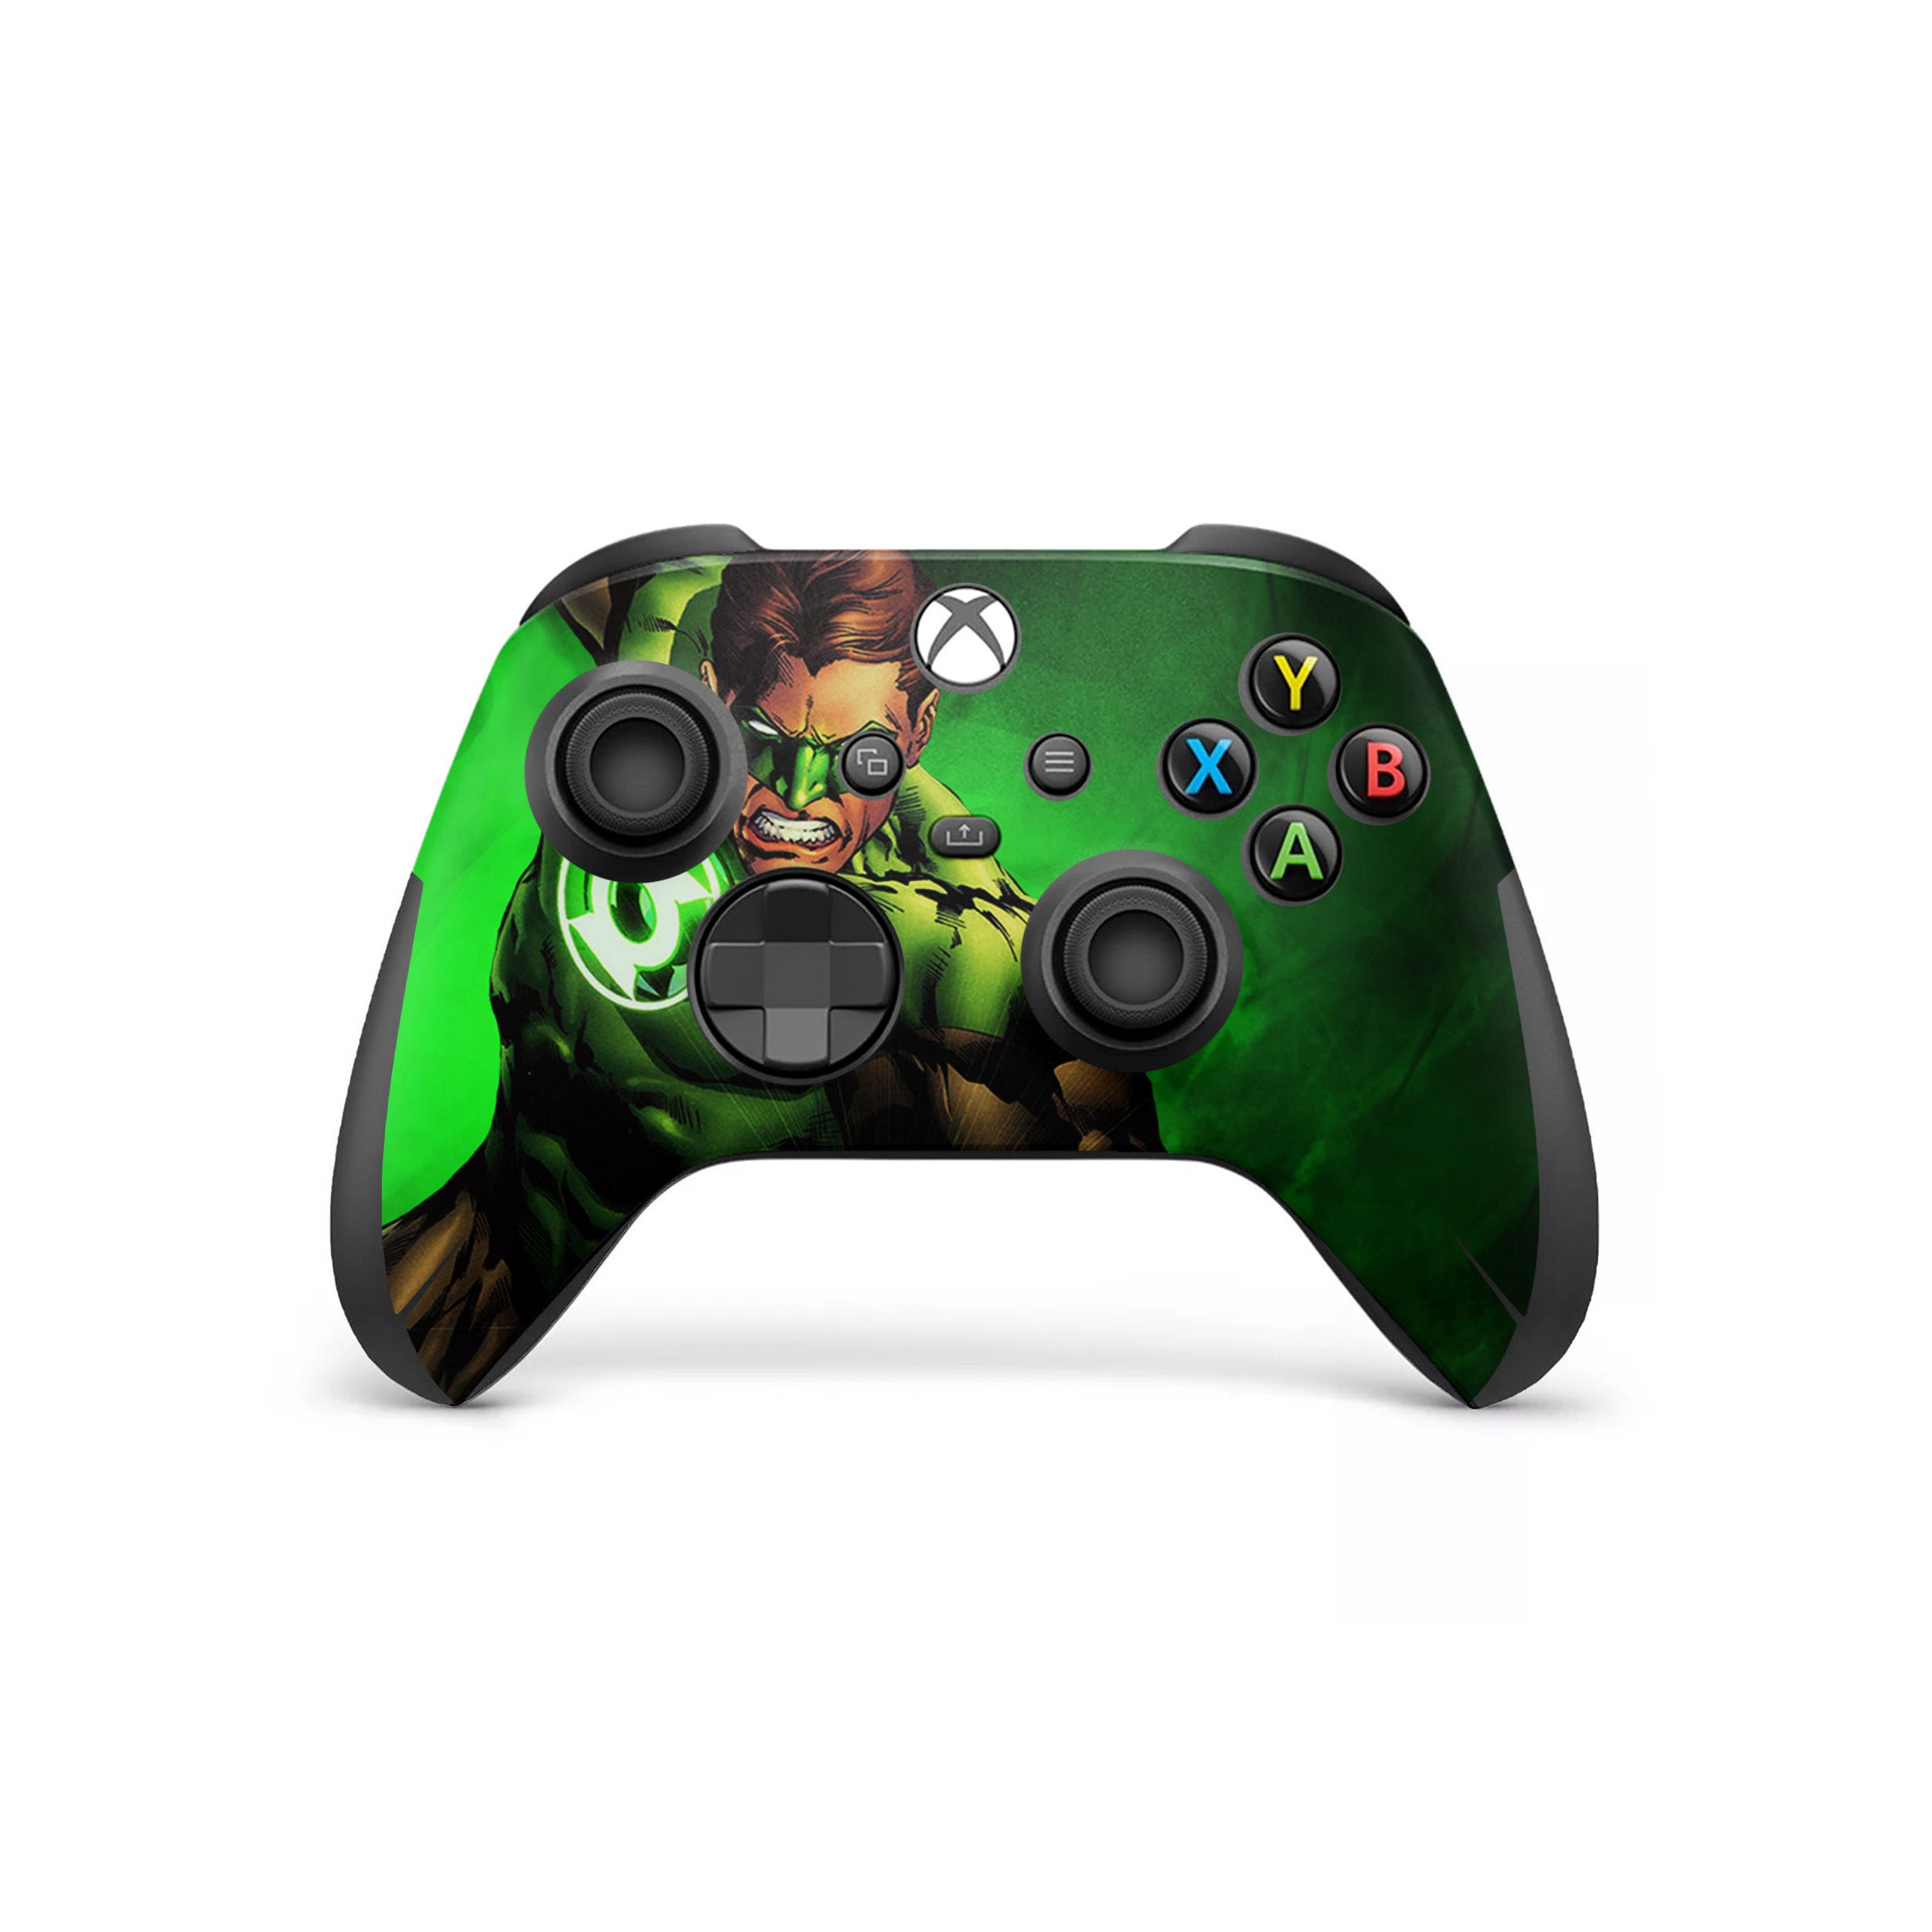 A video game skin featuring a Marvel Green Lantern design for the Xbox Wireless Controller.